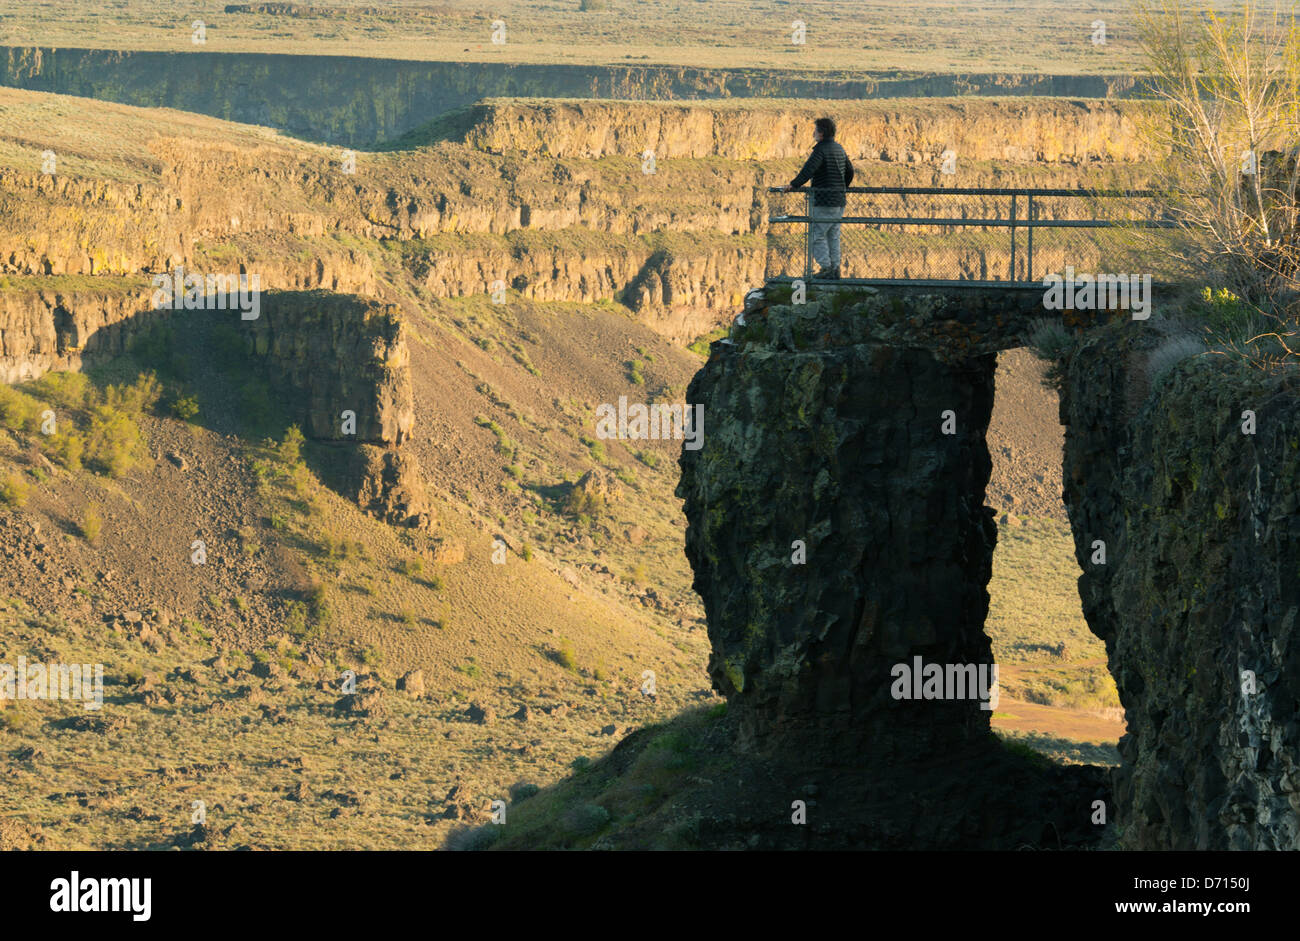 Viewpoint over Sun Lakes and Dry Falls, Dry Falls State Park, Washington, APRIL Stock Photo